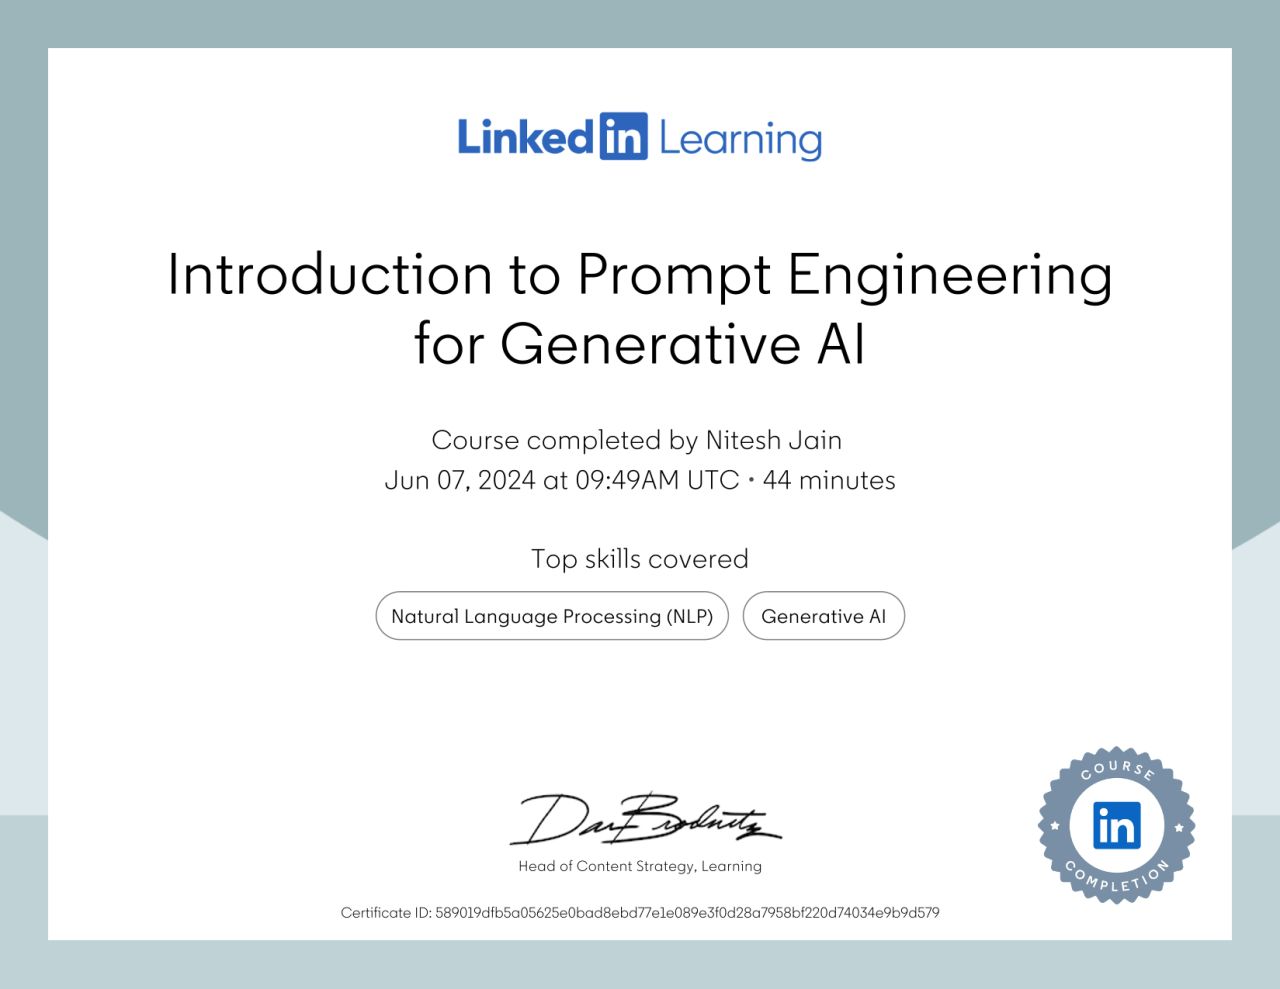 Certificate of completion for Introduction to Prompt Engineering for Generative AI content earned by Nitesh Jain